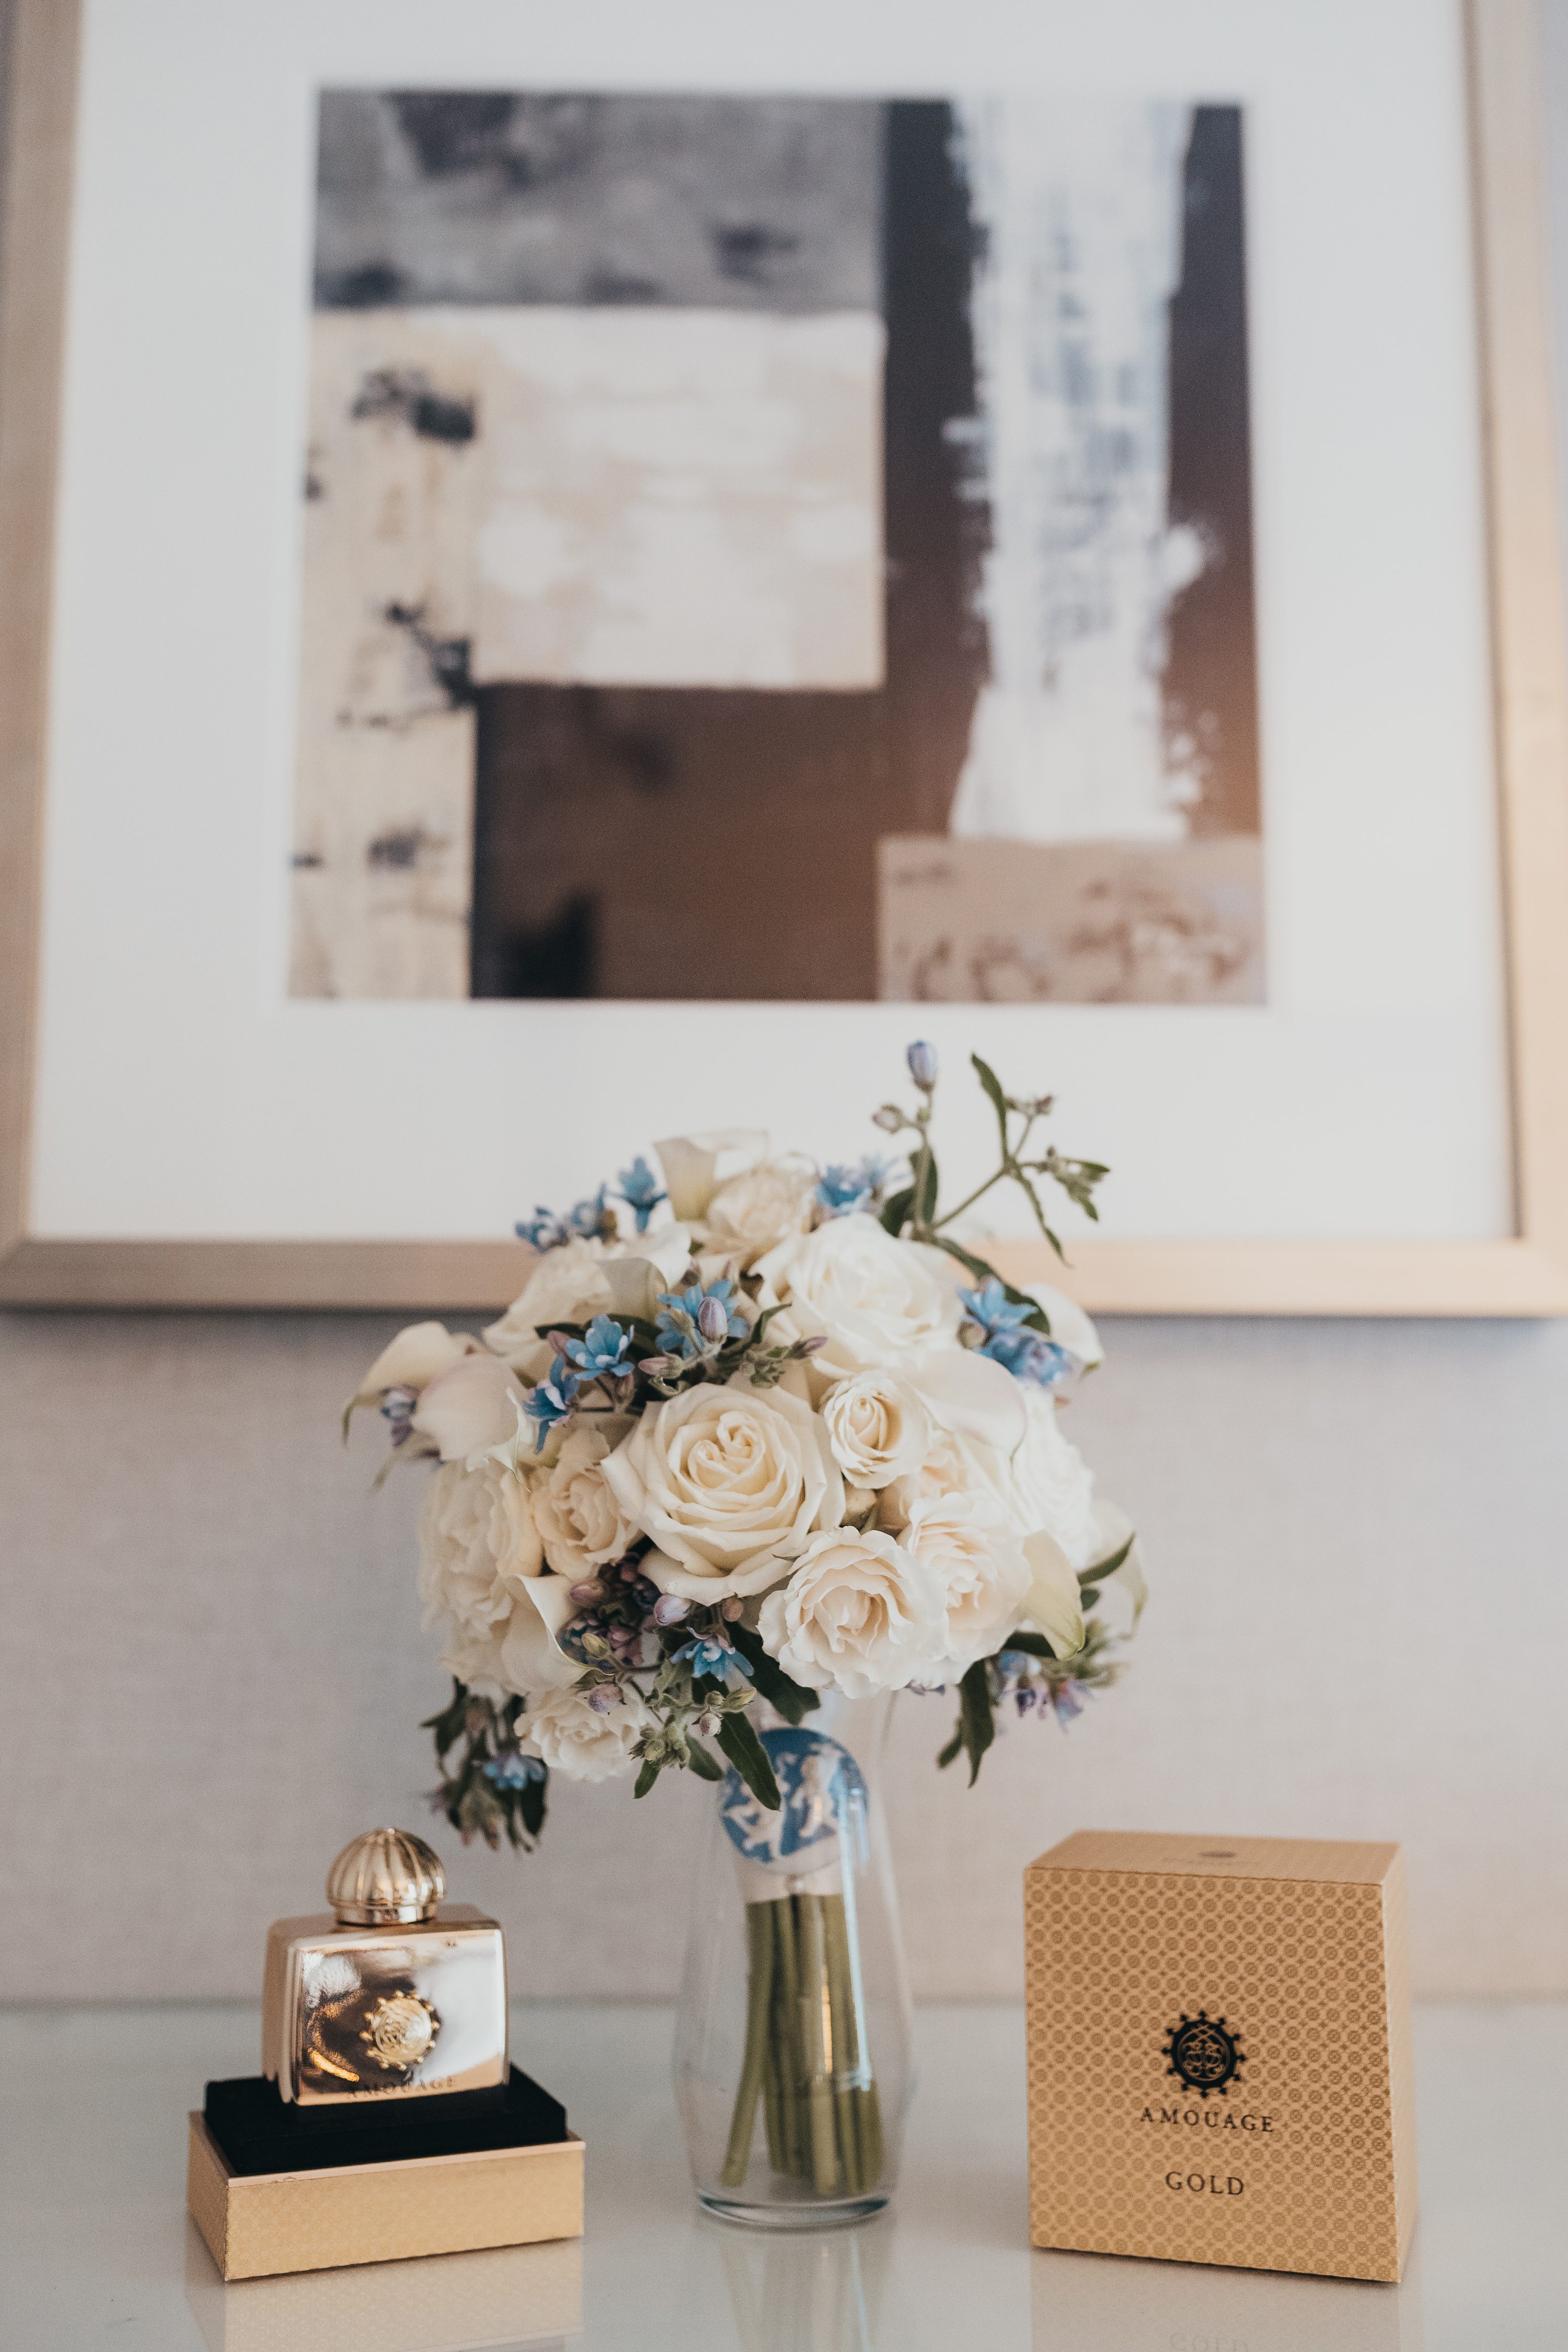 sony alpha a7iii,fairmont hotel copley,artistic blossoms boston,amouage gold,white roses and blue accent flowers